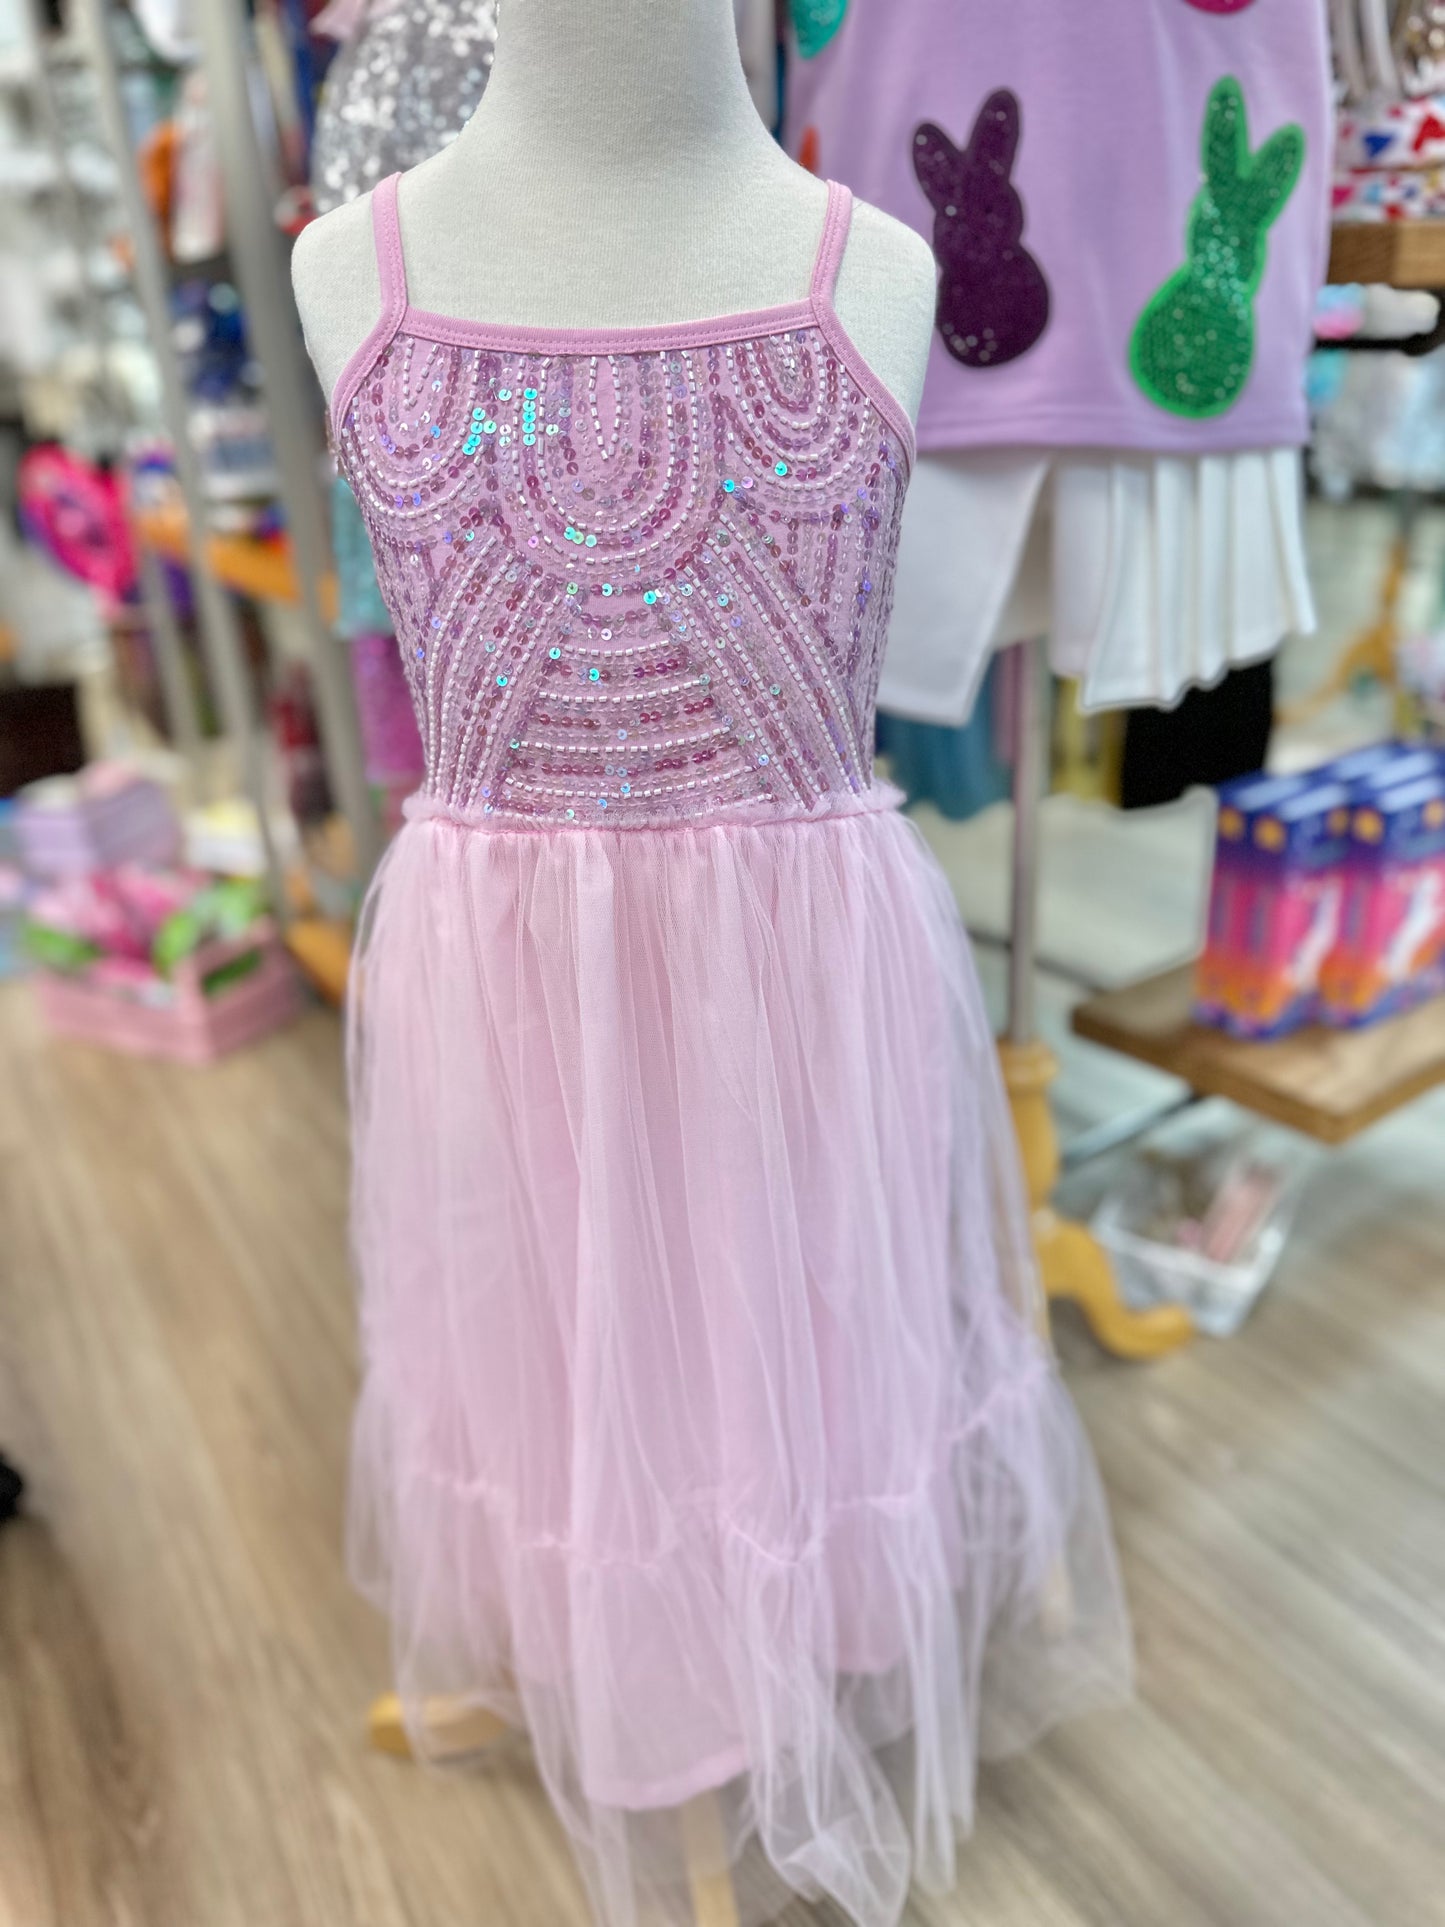 Hip Hop Tulle Strappy Dress (2 colors)